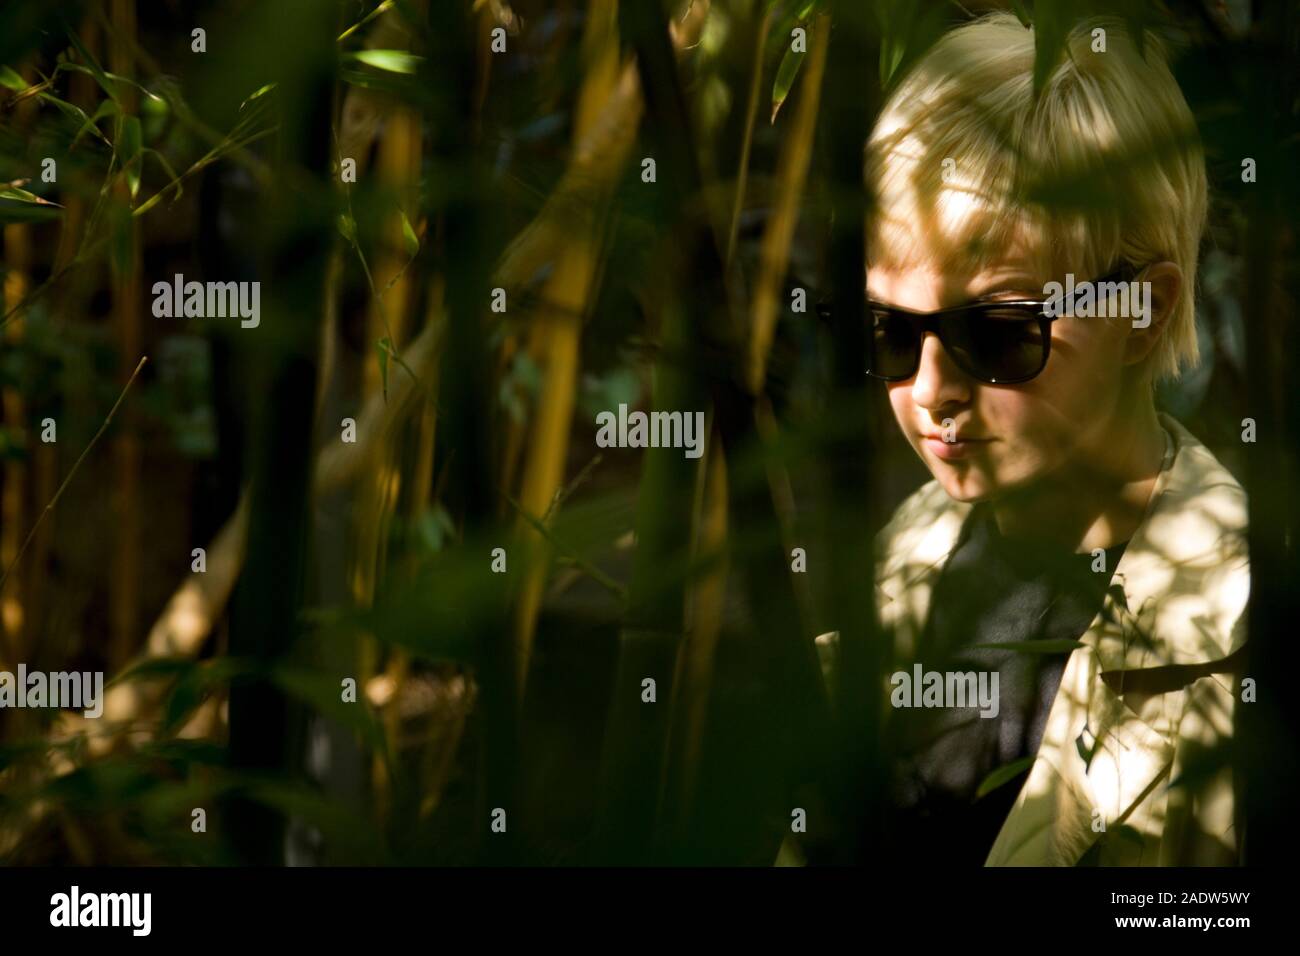 Stylish young woman, 20's, wearing 1950's style trenchcoat and sun glasses, seen through foliage Stock Photo